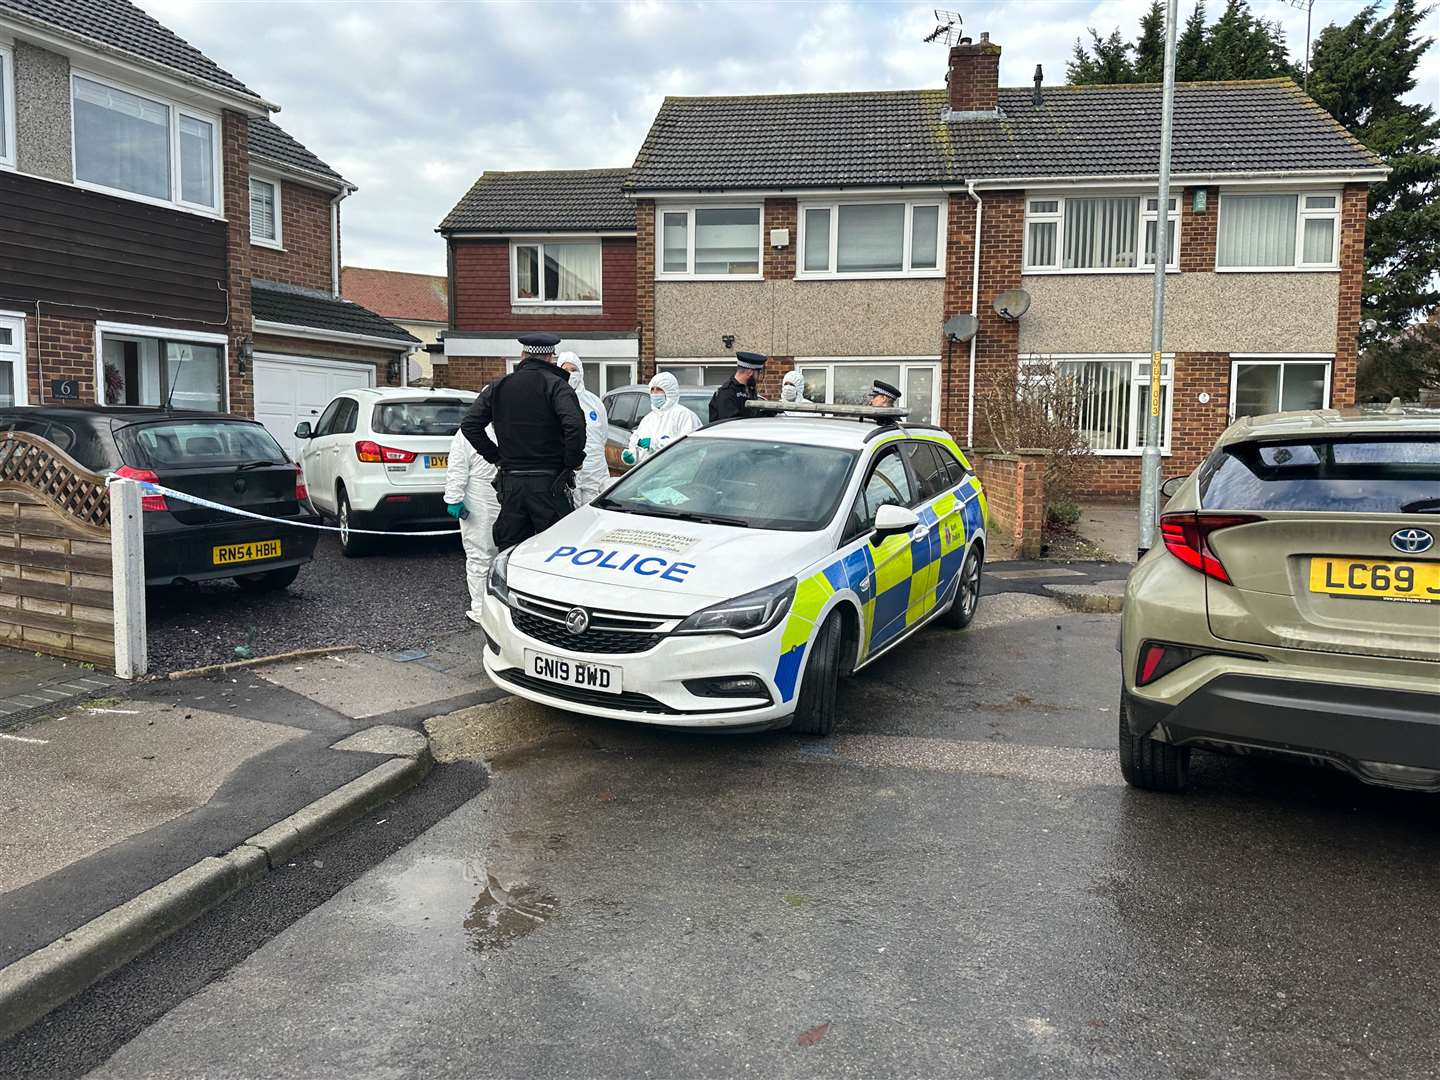 Police cordoned off the home, which is just off College Road in Sittingbourne